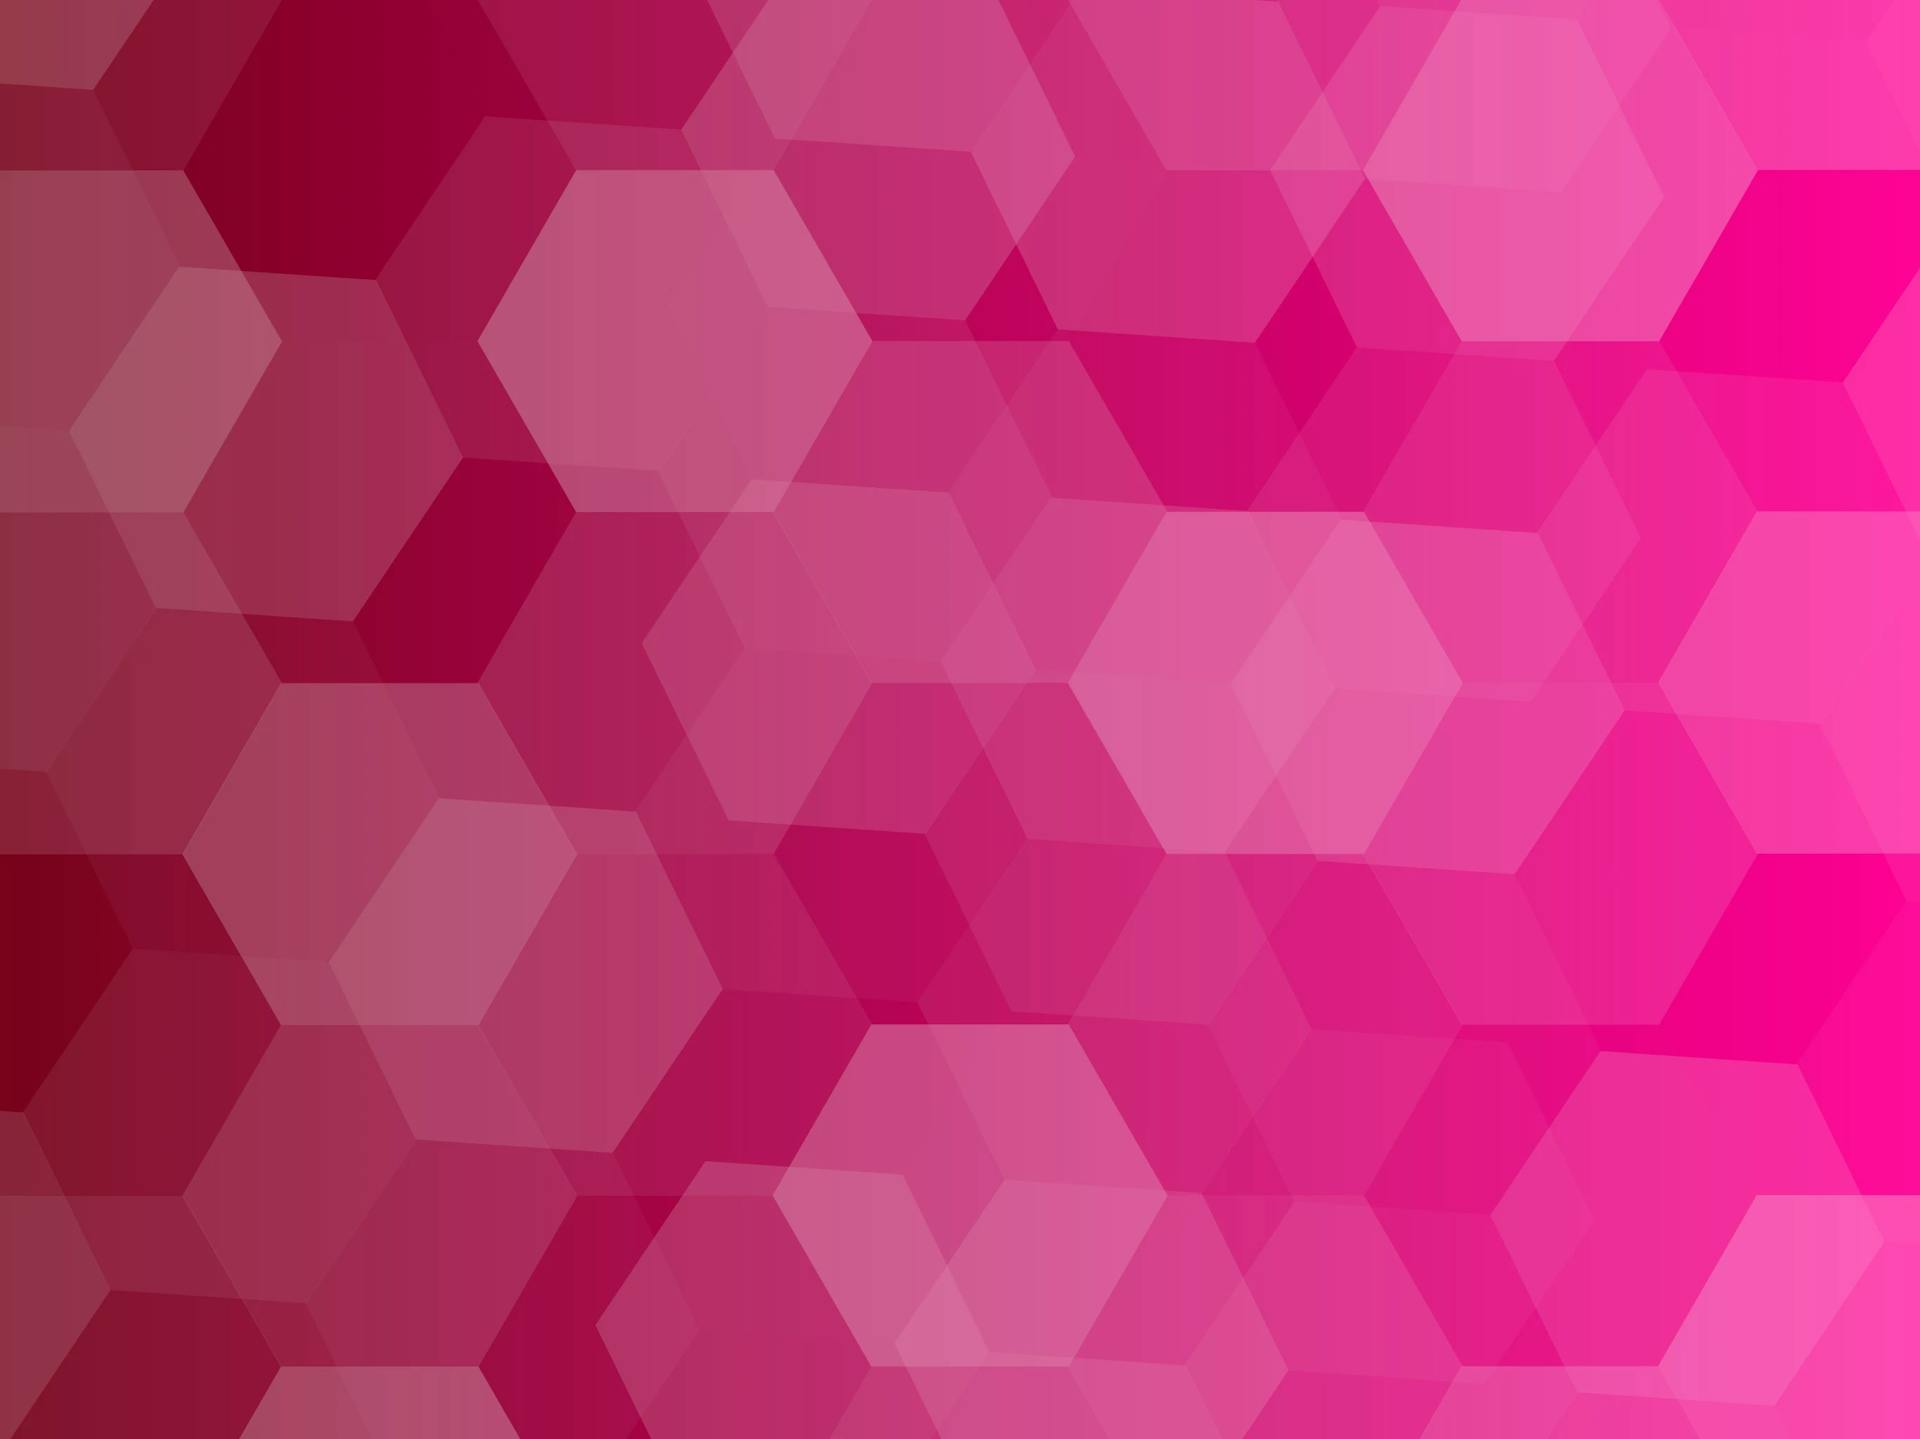 Polygonal Prism abstract pink background design